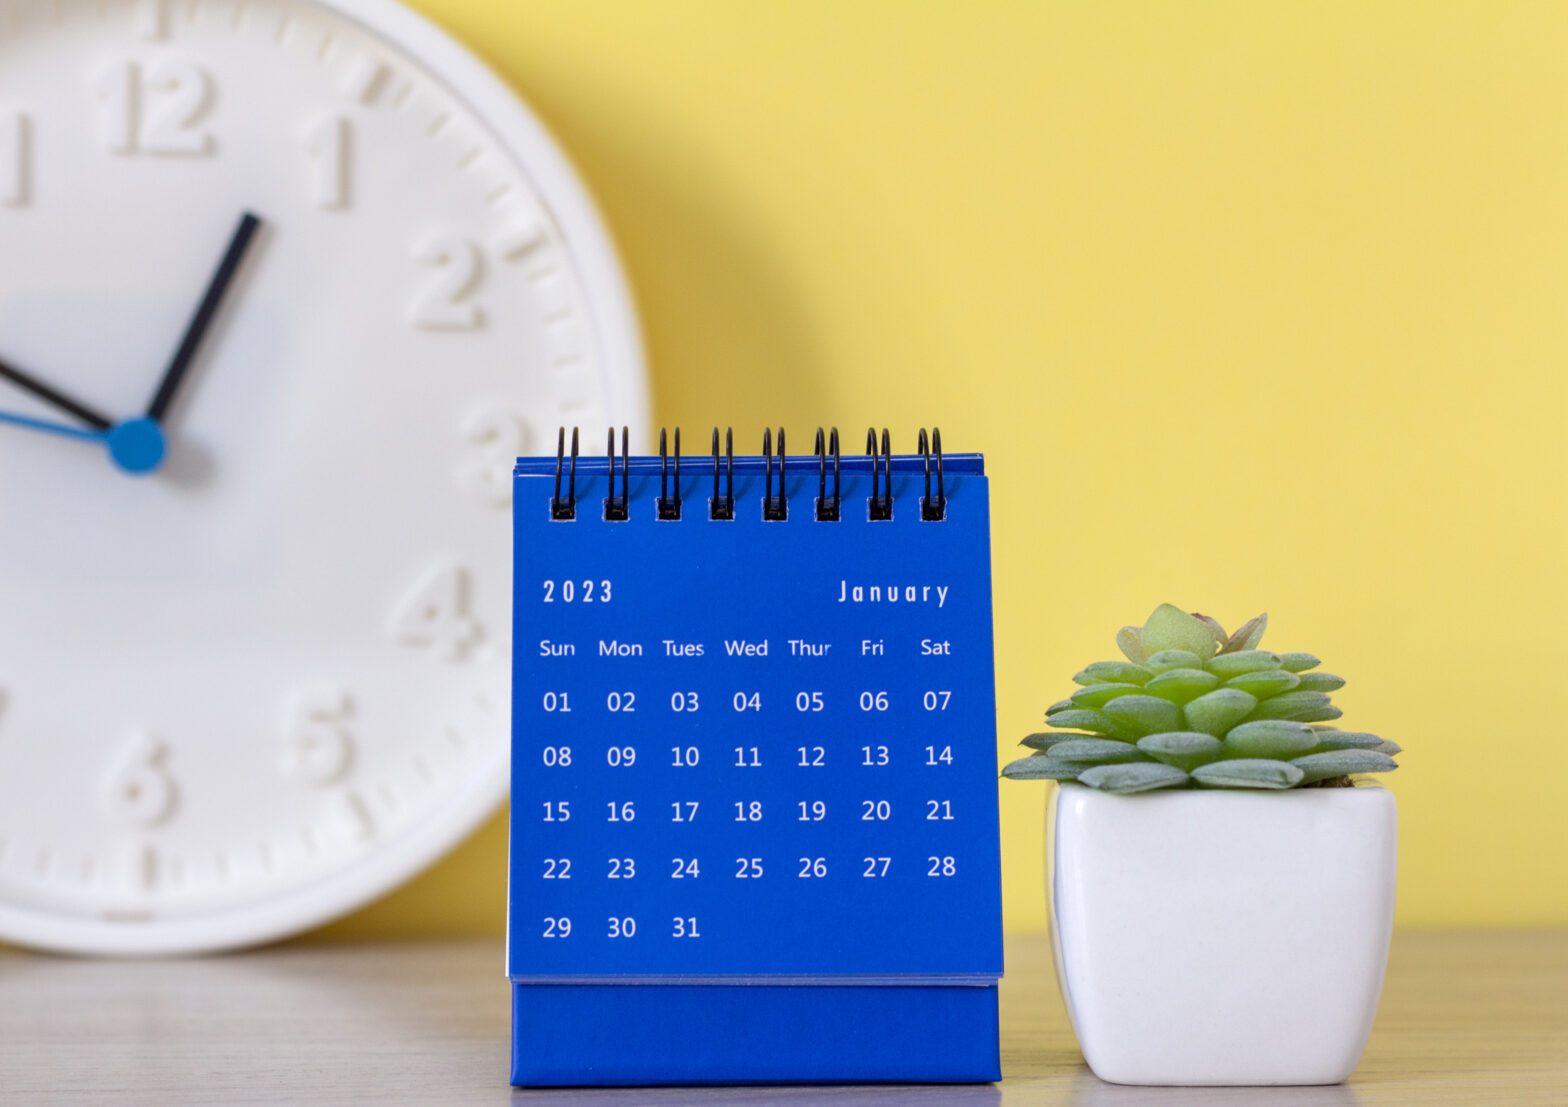 Desktop calendar for January 2023 on a yellow background